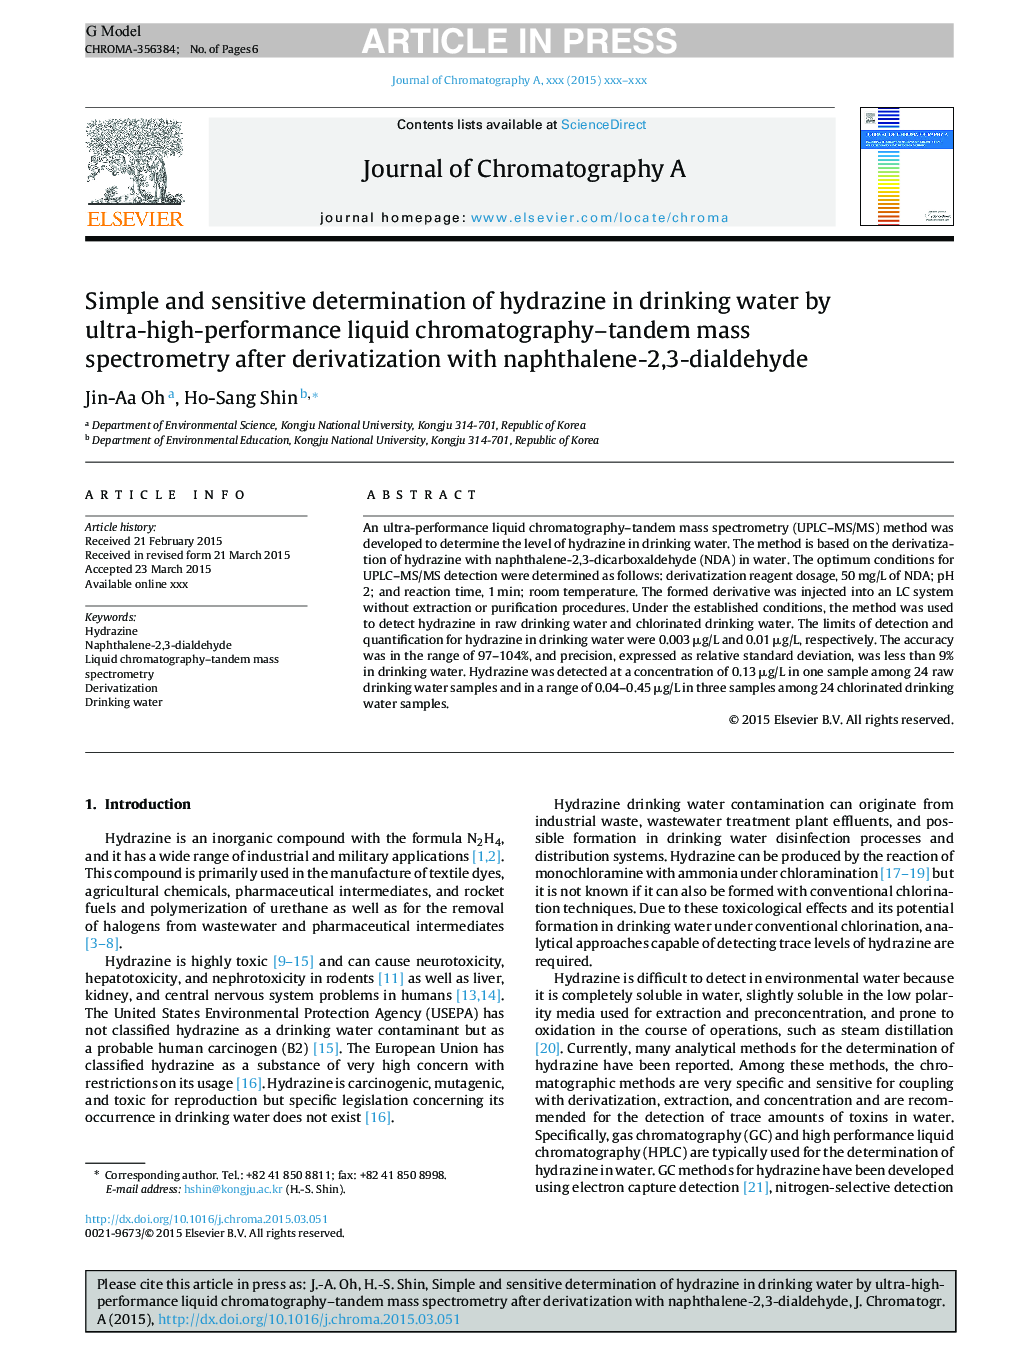 Simple and sensitive determination of hydrazine in drinking water by ultra-high-performance liquid chromatography-tandem mass spectrometry after derivatization with naphthalene-2,3-dialdehyde